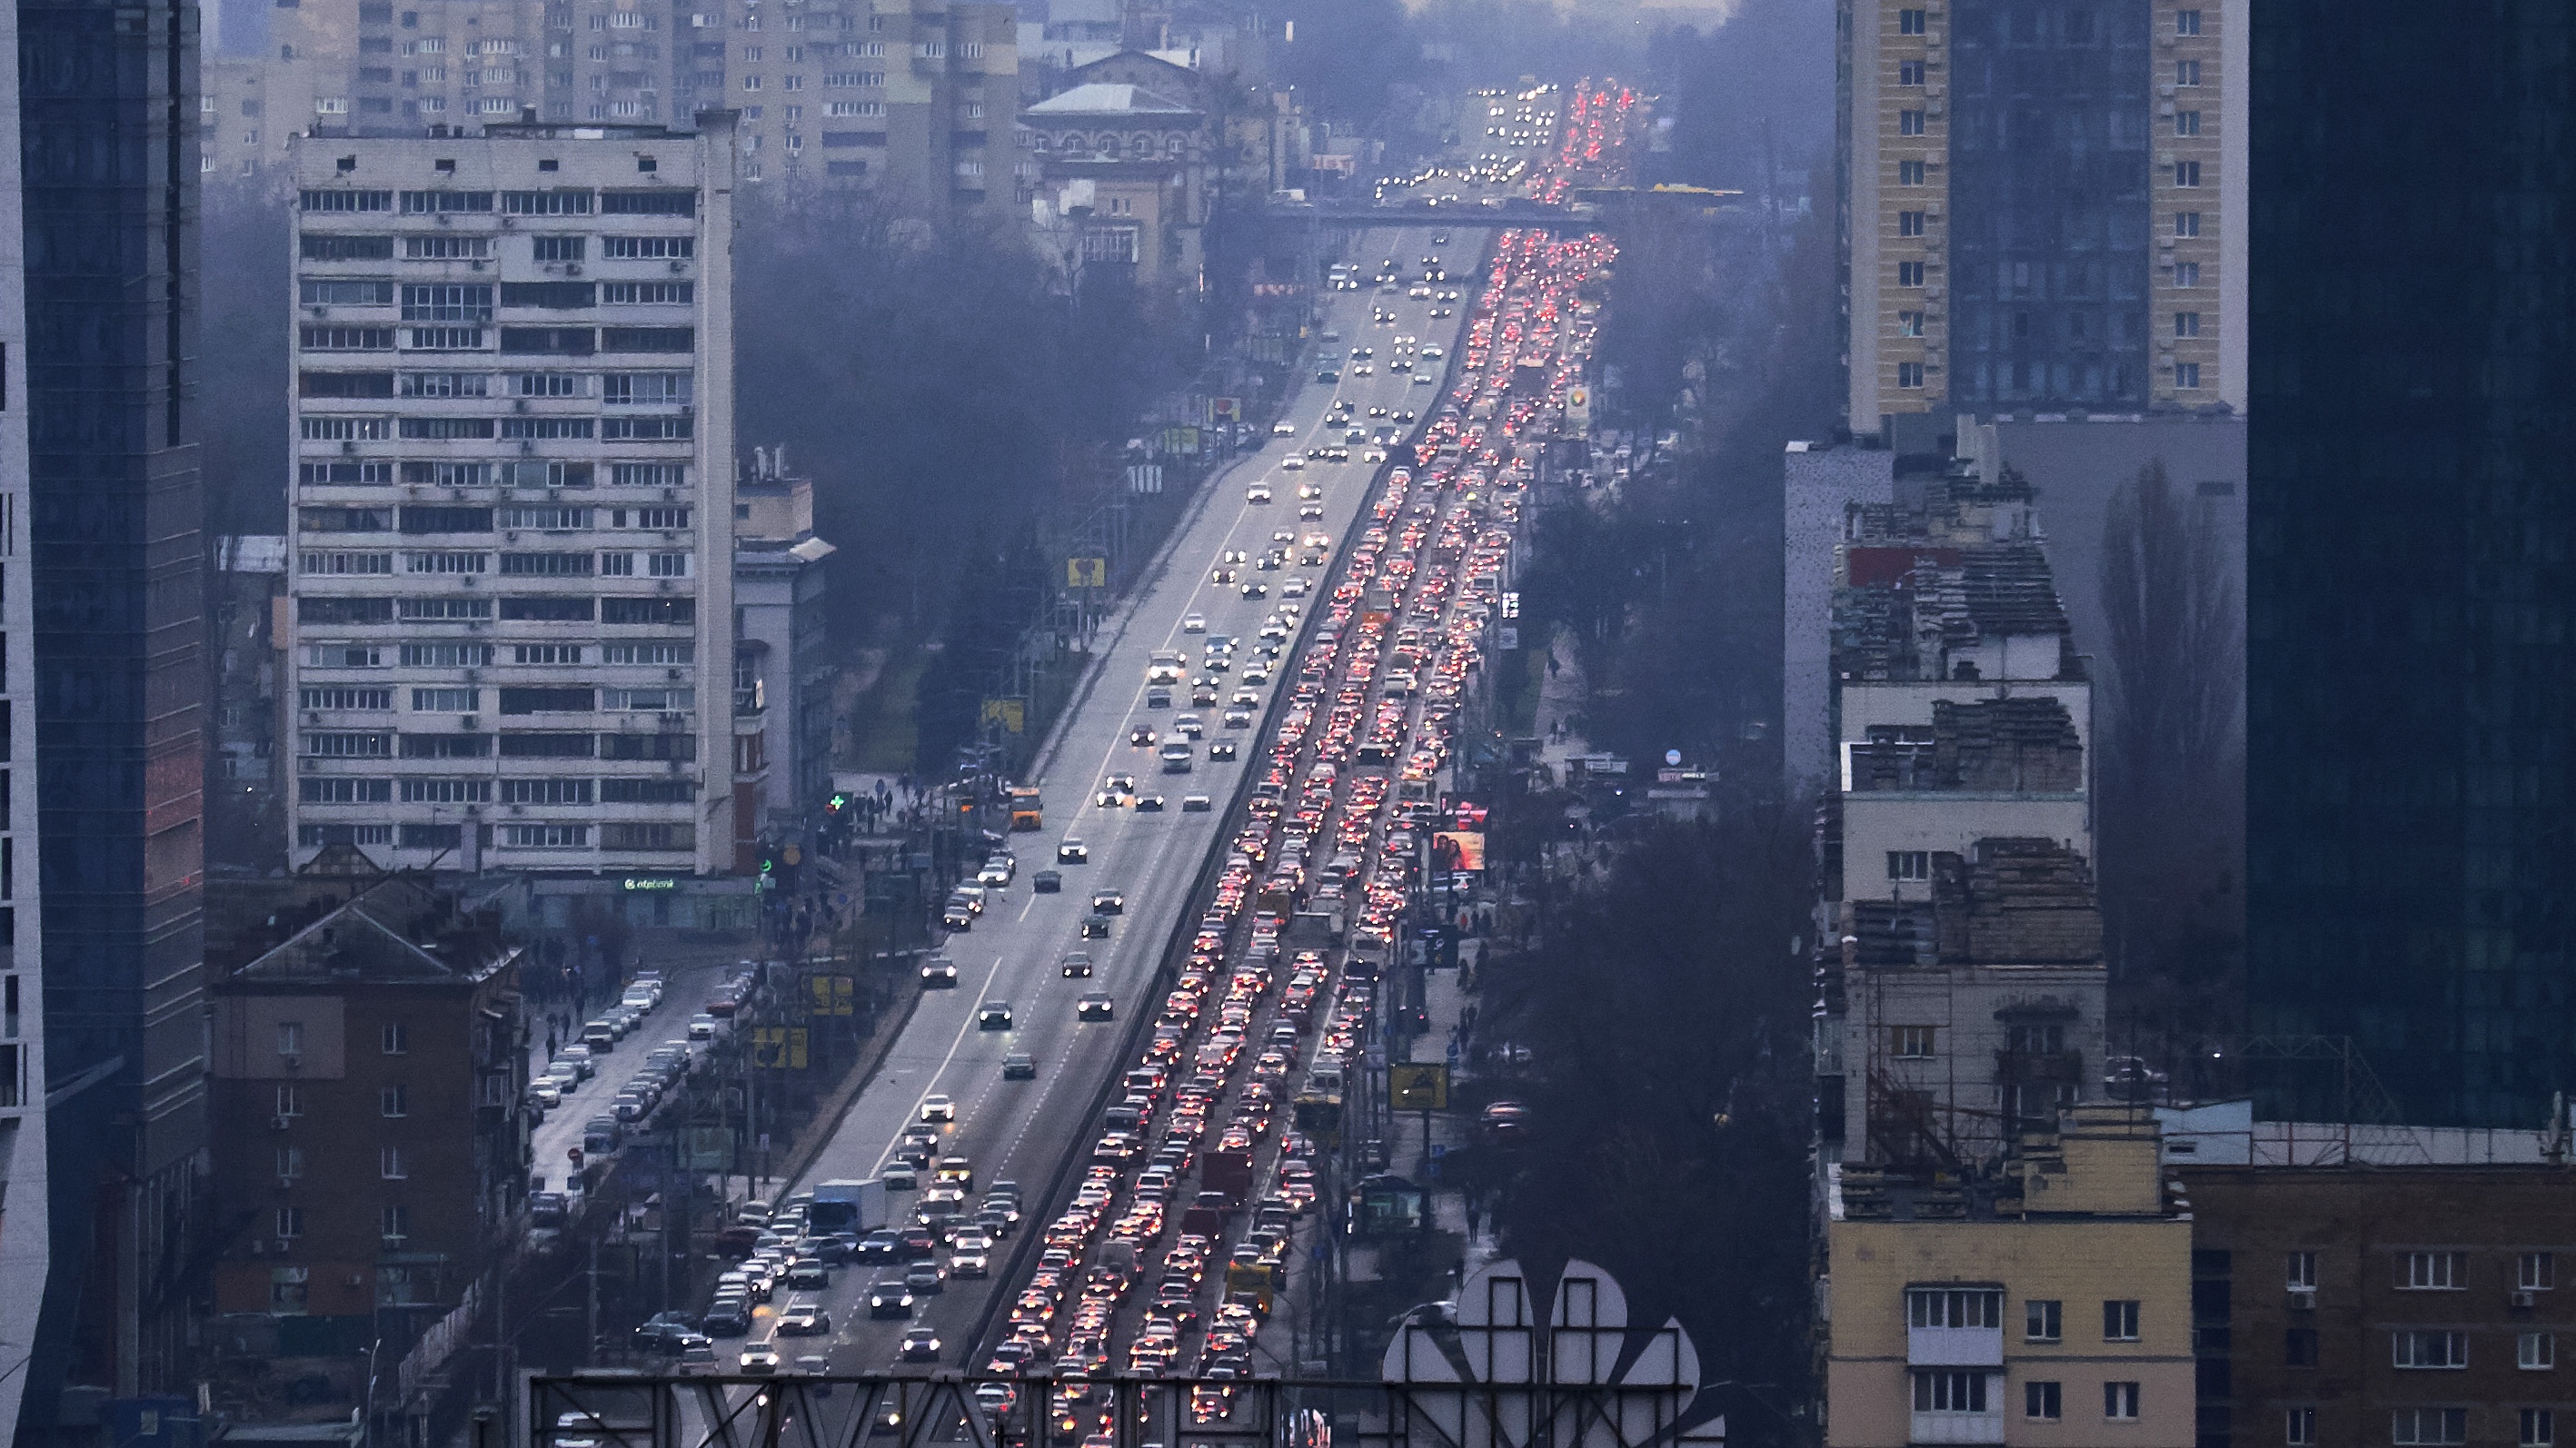 24 February: Traffic jams form as citizens flee Kyiv following pre-offensive missile strikes by Russian armed forces